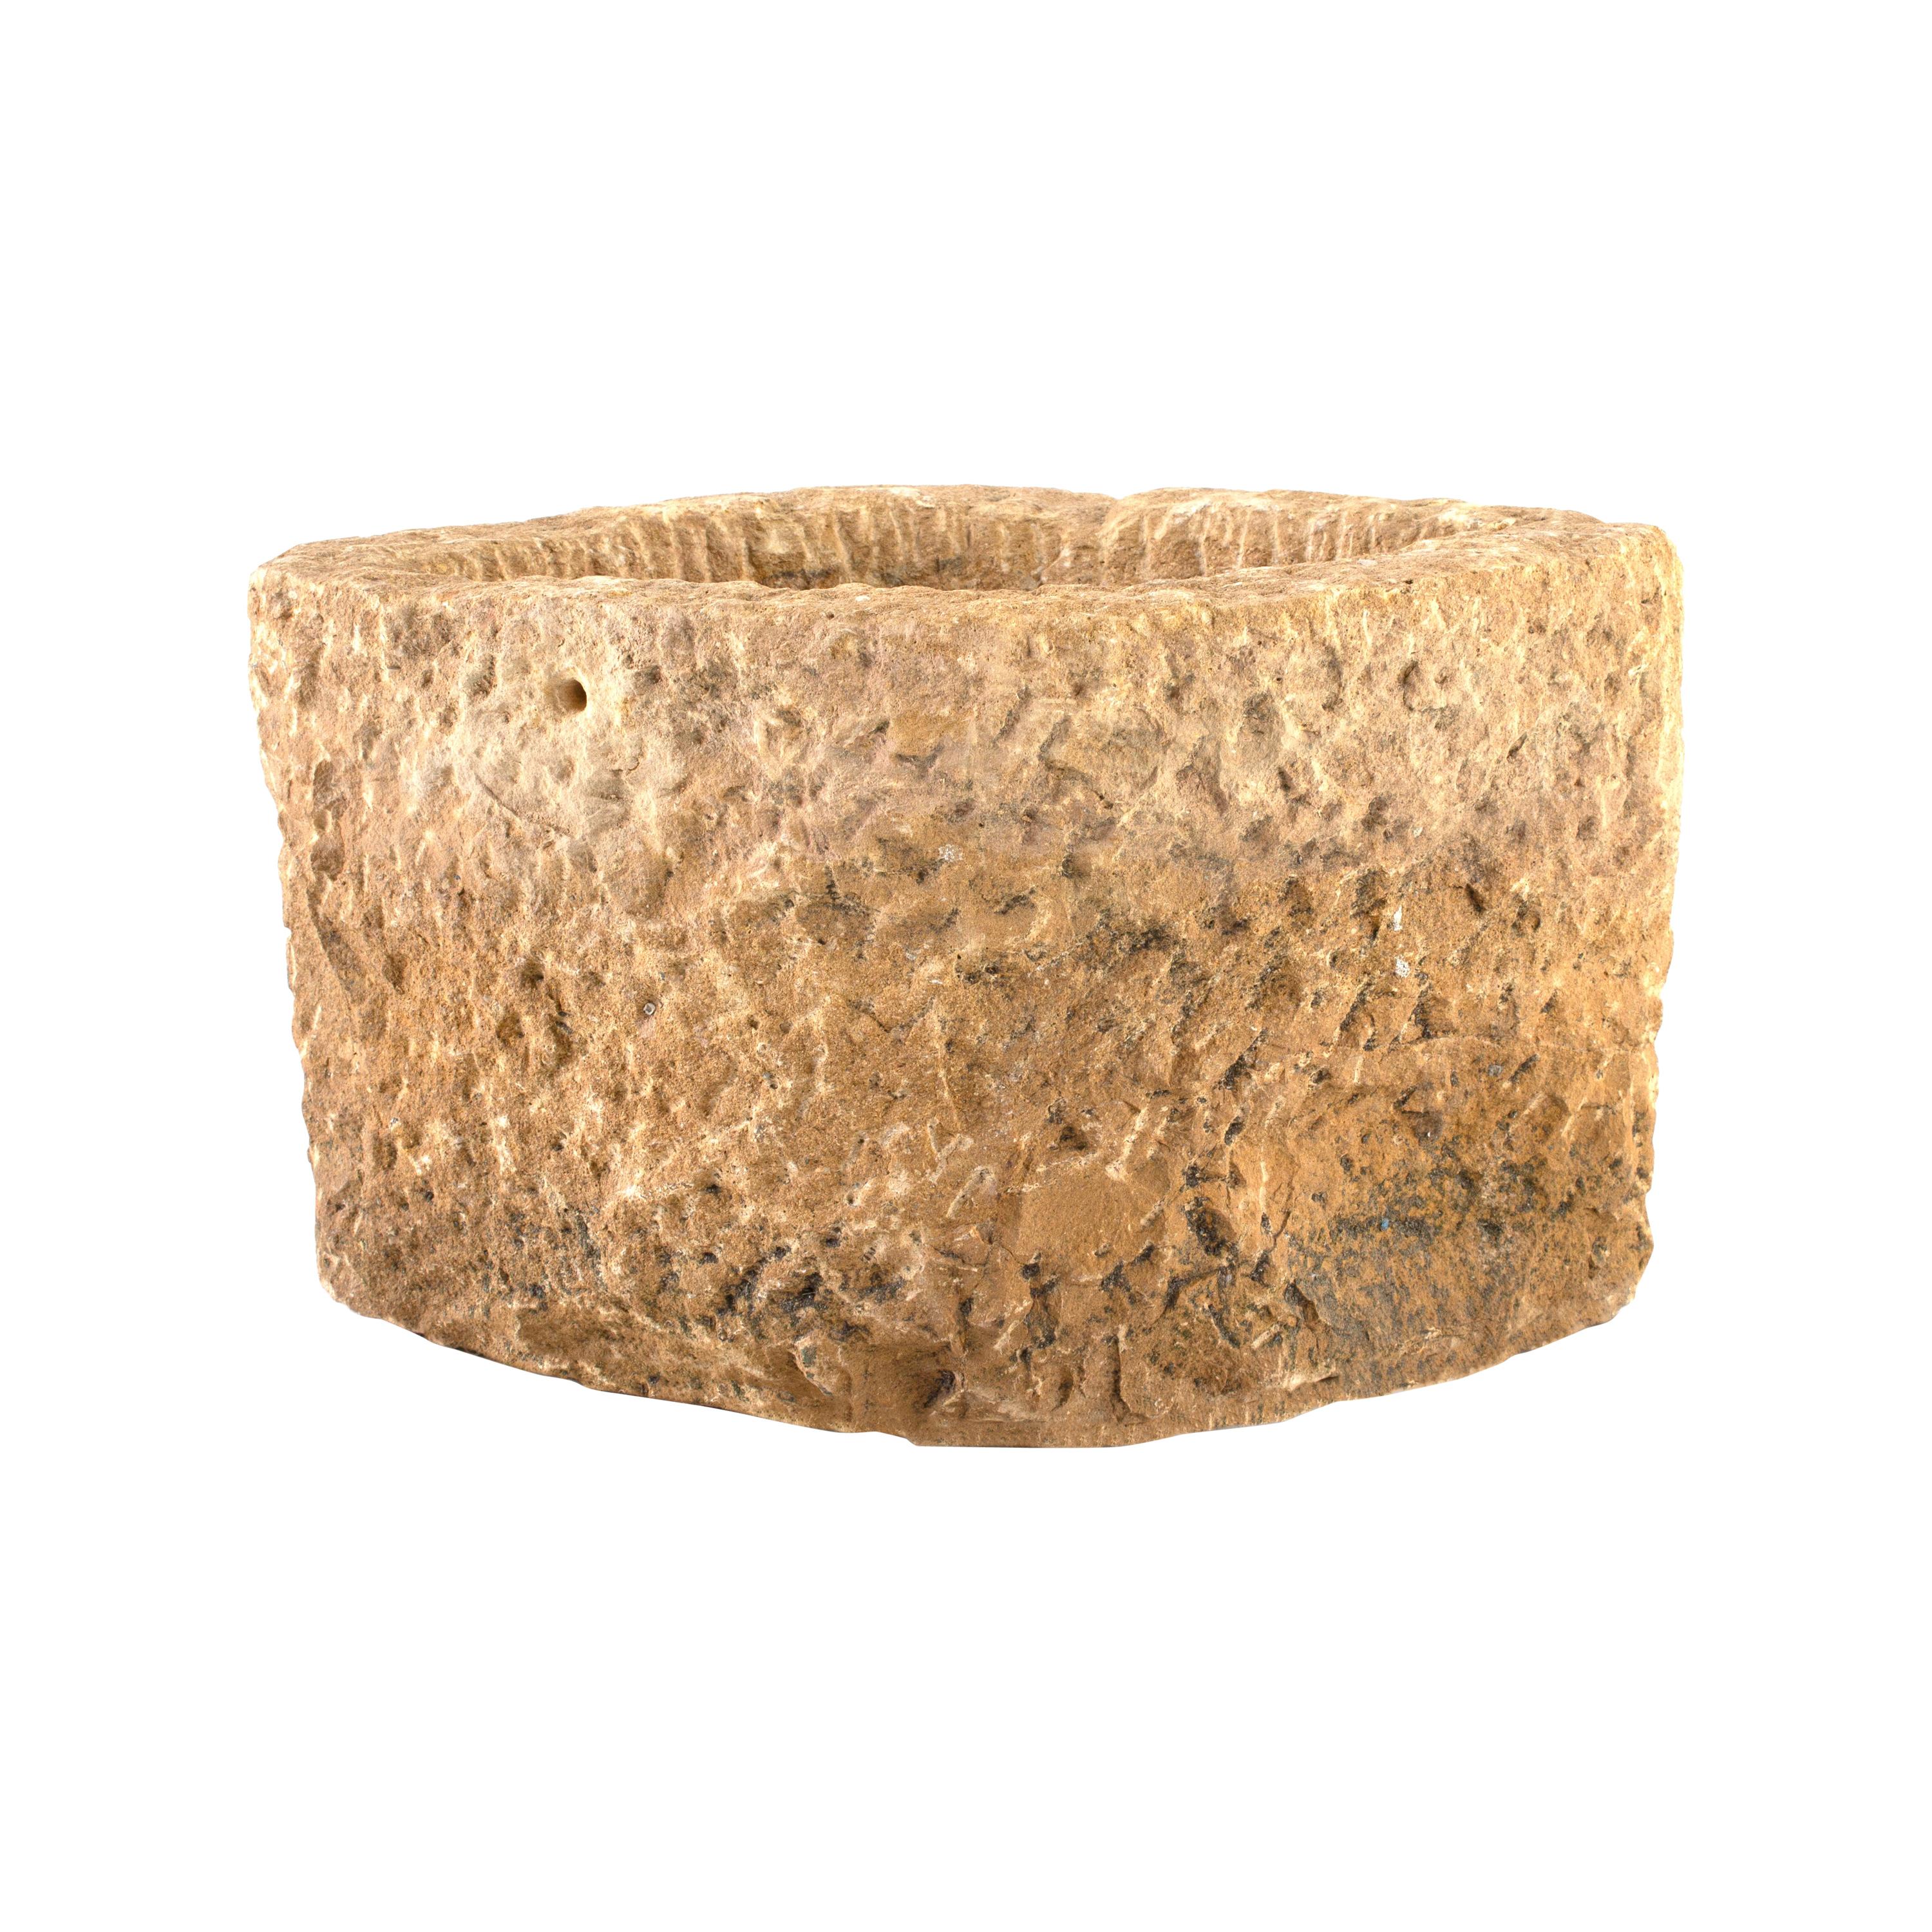 Hand Carved Stone Milling Bowl, Square